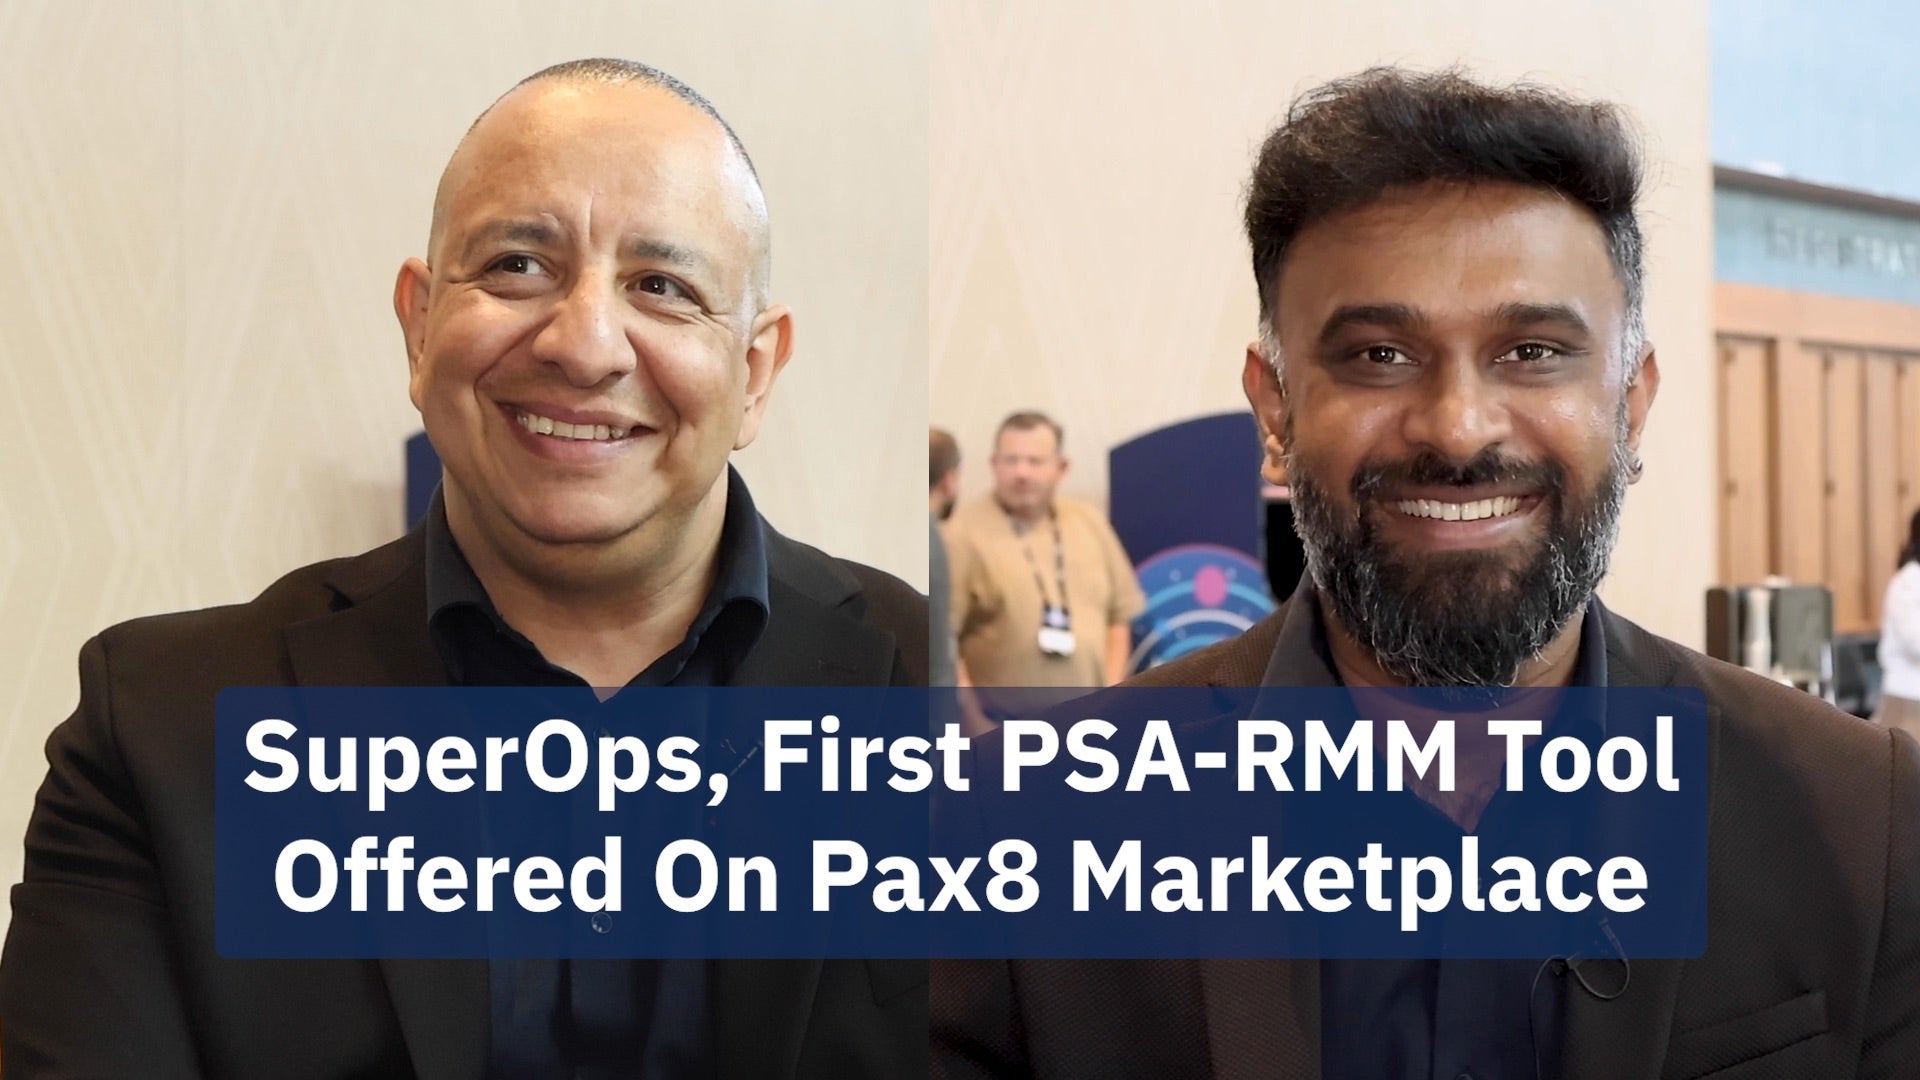 Video: SuperOps CEO, Channel Chief On Offering First PSA-RMM Tool On Pax8 Marketplace